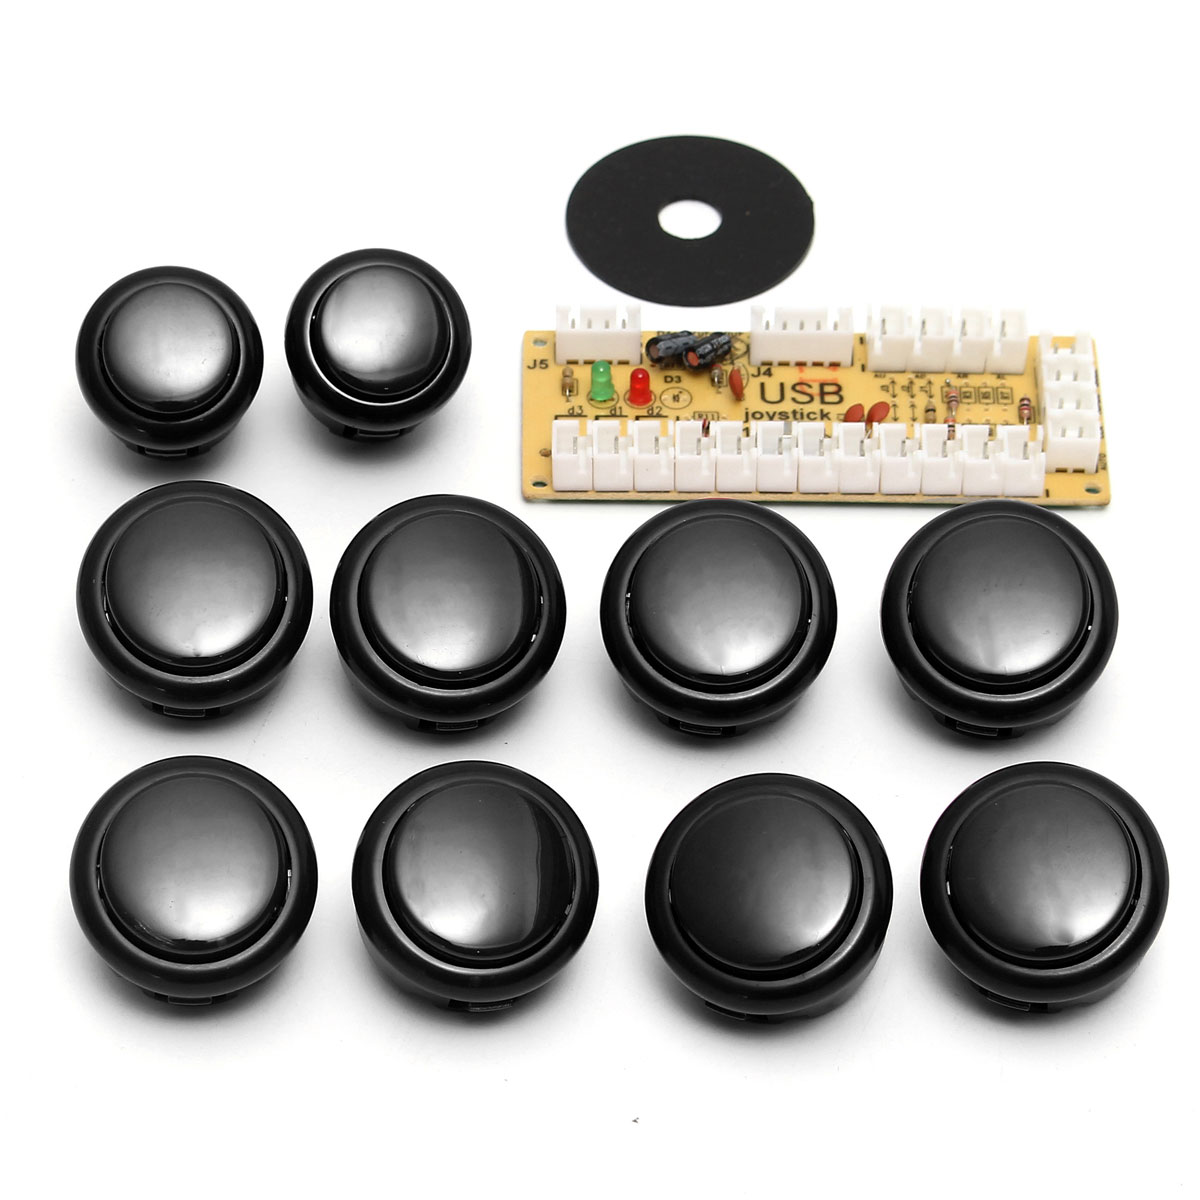 Game DIY Arcade Set Kits Replacement Parts USB Encoder to PC Joystick and Buttons 60